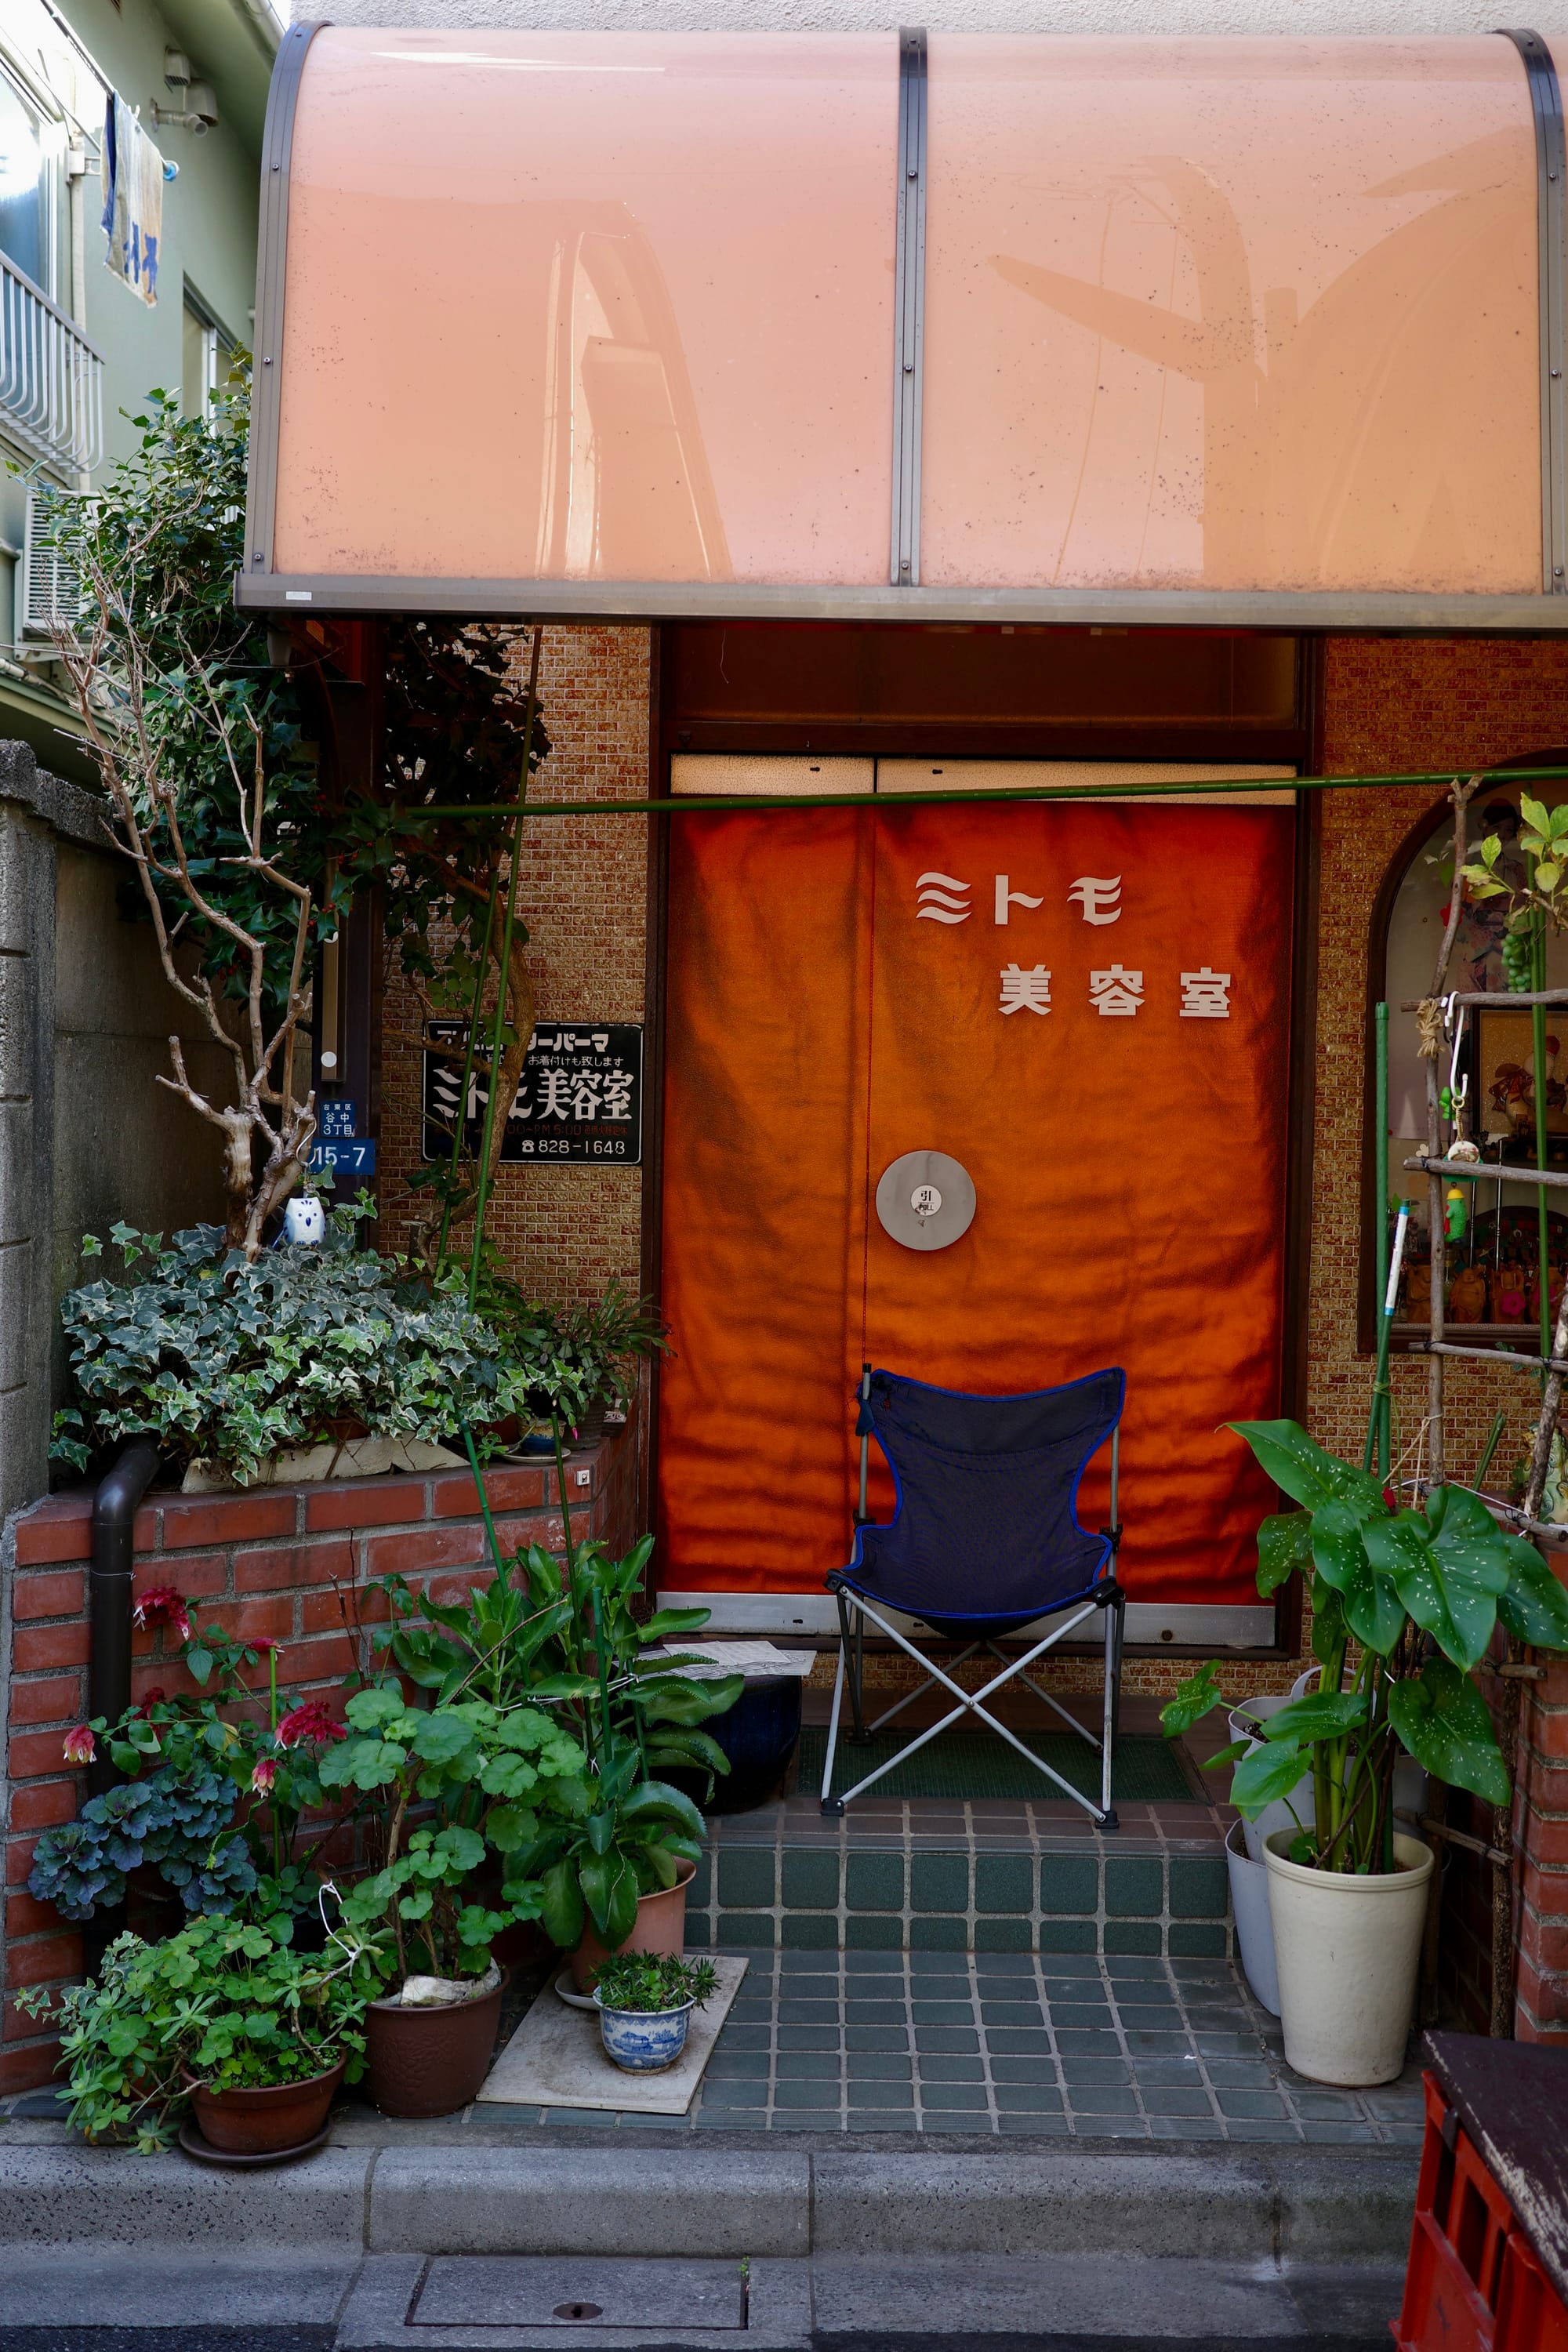 A blue camping chair sits in front of an orange door, surrounded by potted plants.